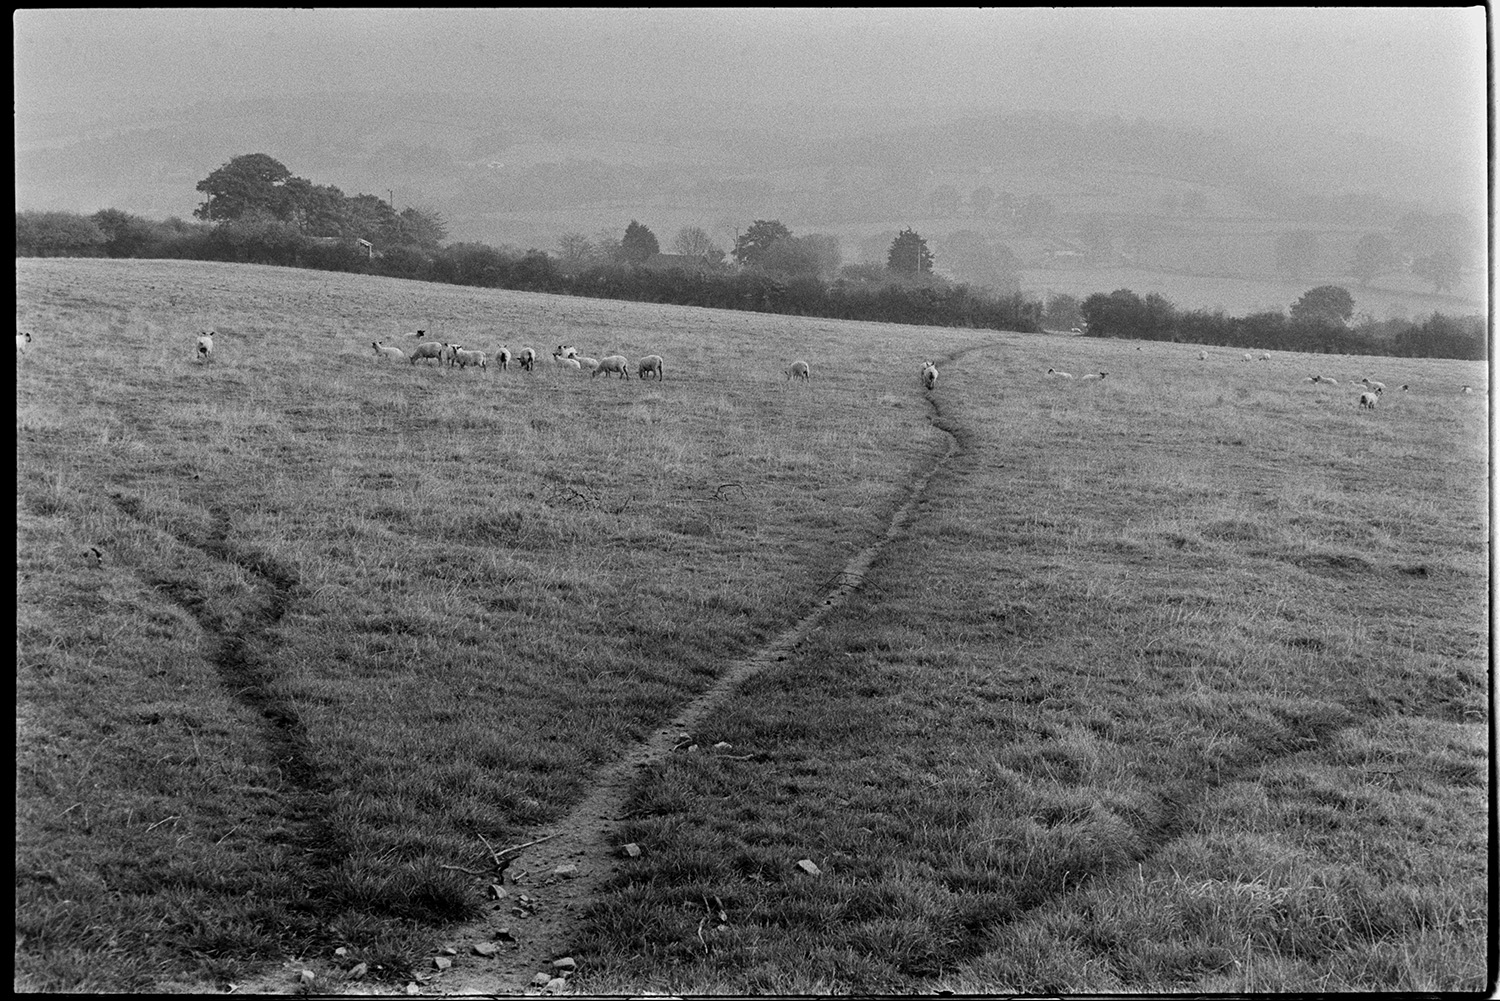 Misty, but very boring views. 
[Sheep grazing in a field with a footpath running through it near Chulmleigh. Trees shrouded in mist can be seen in the background.]